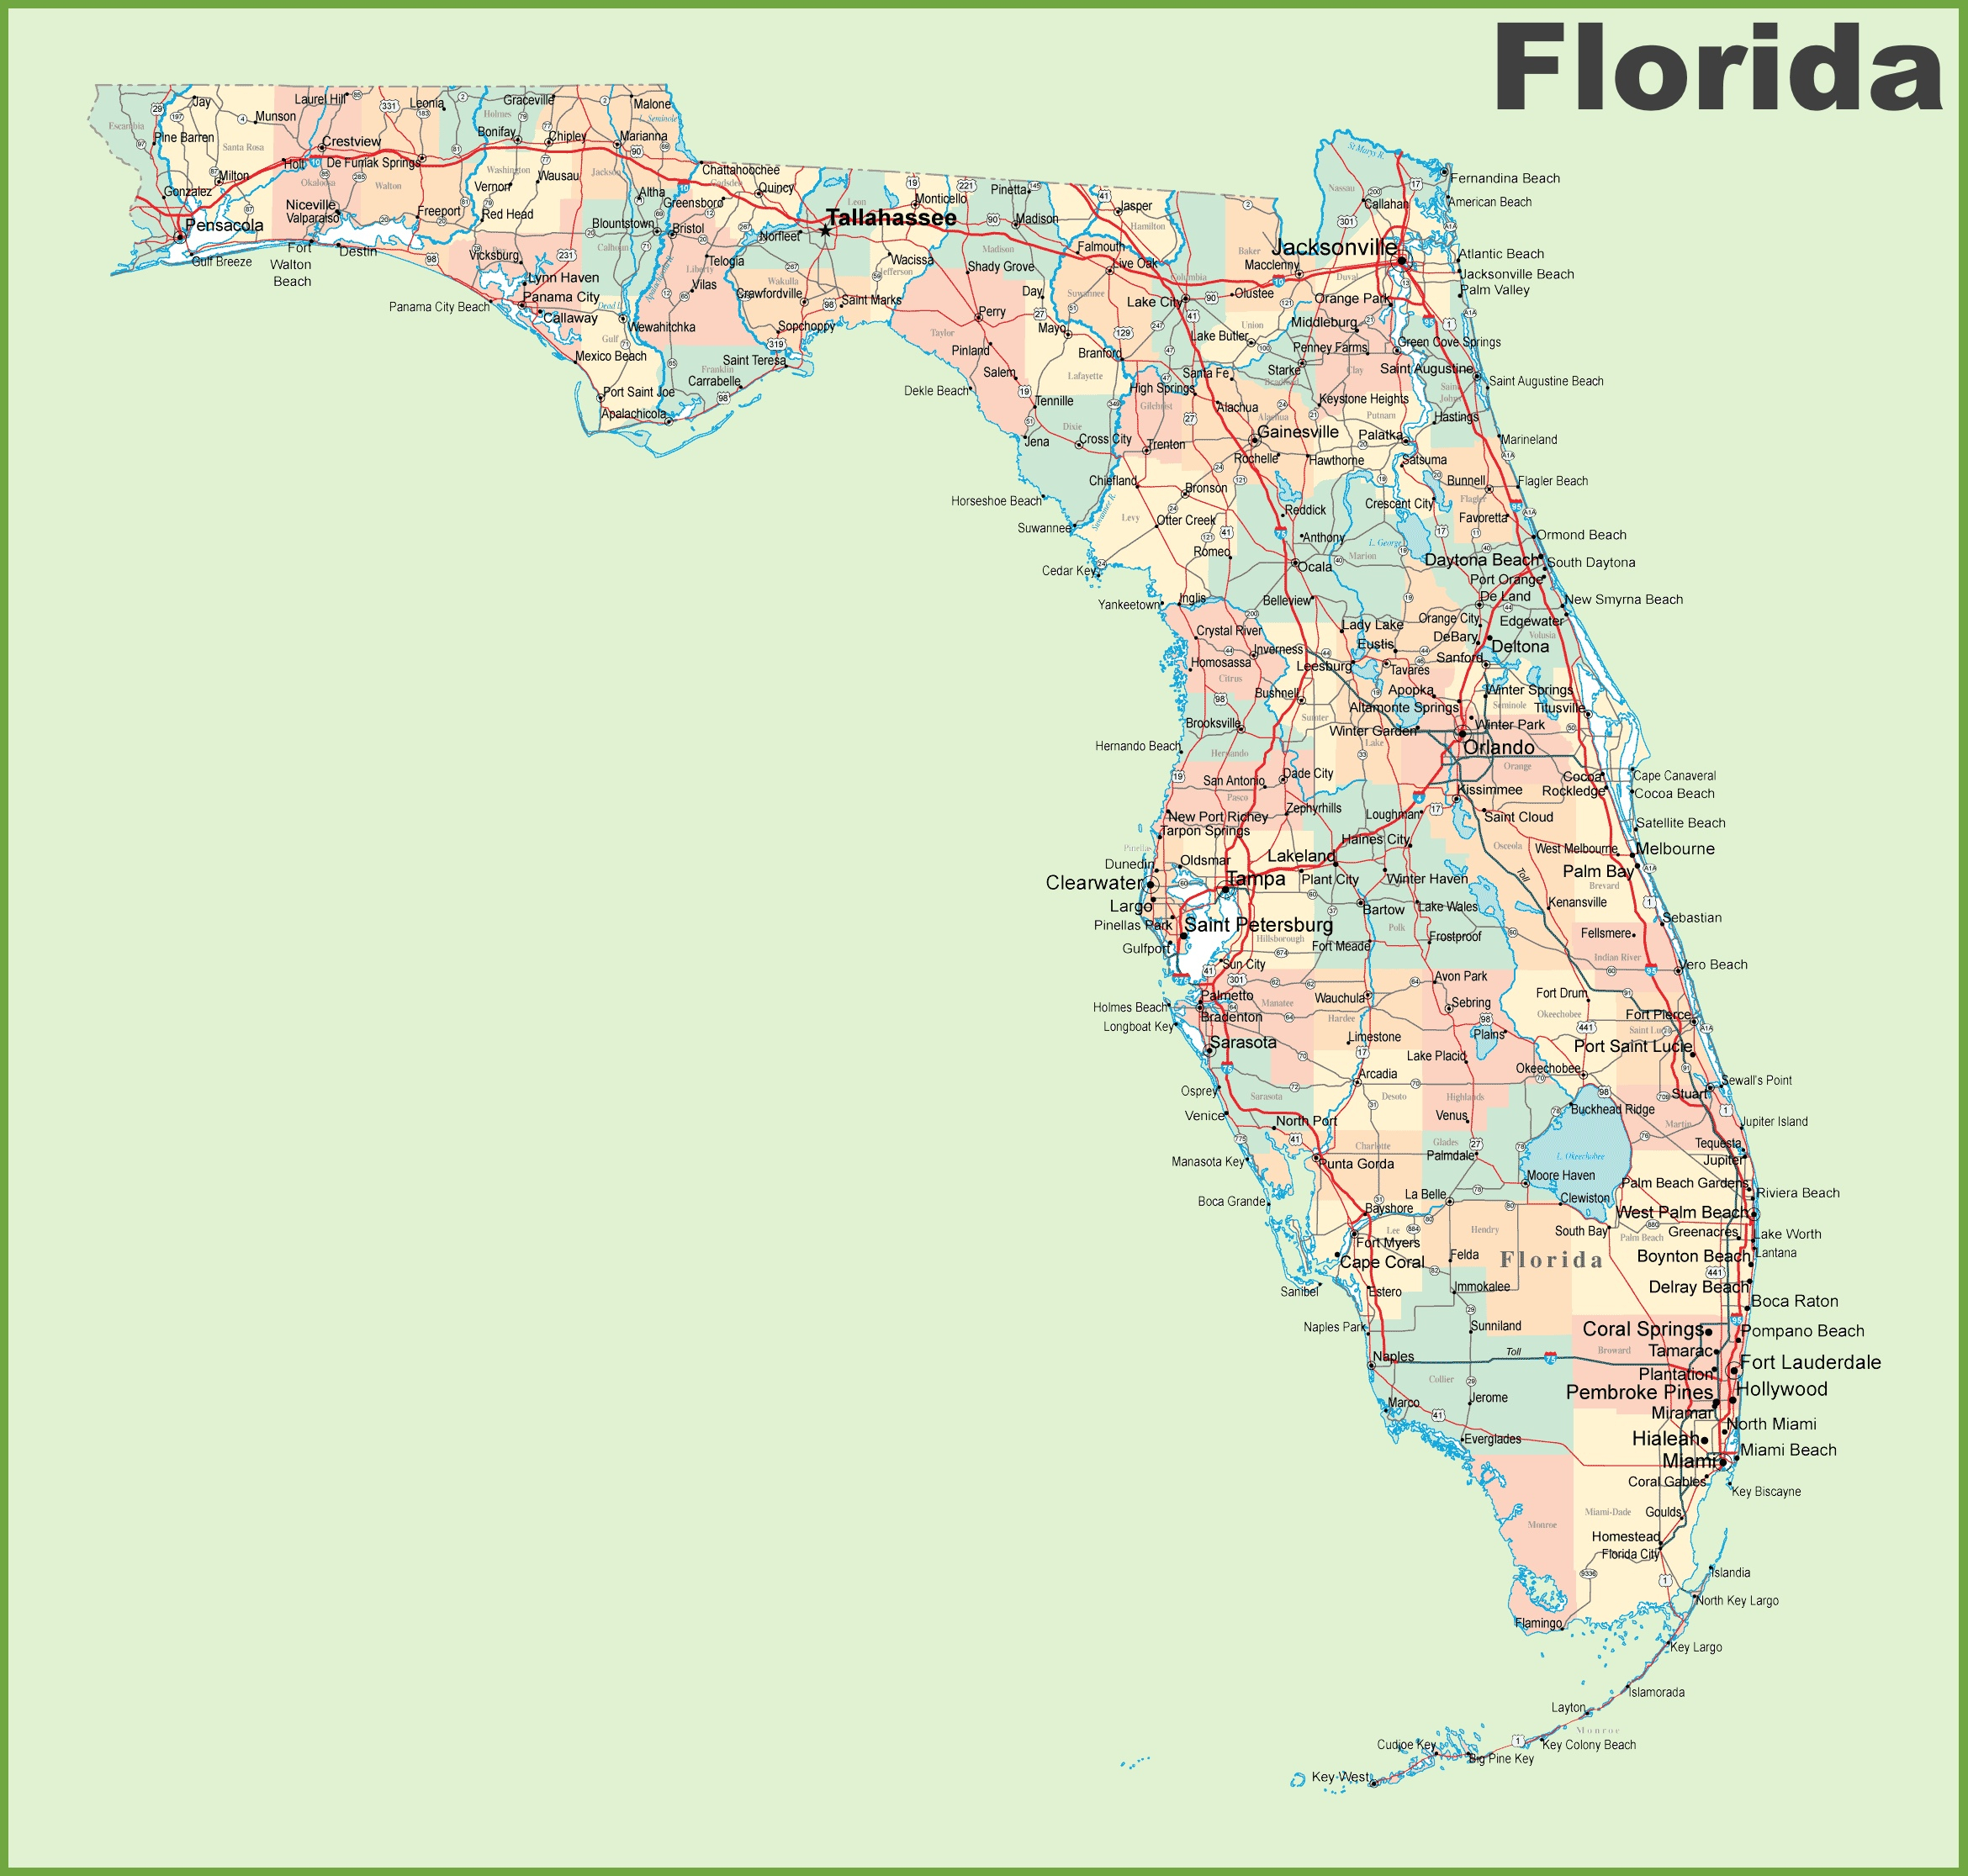 Fla Maps Google And Travel Information | Download Free Fla Maps Google - Maps Google Florida Usa